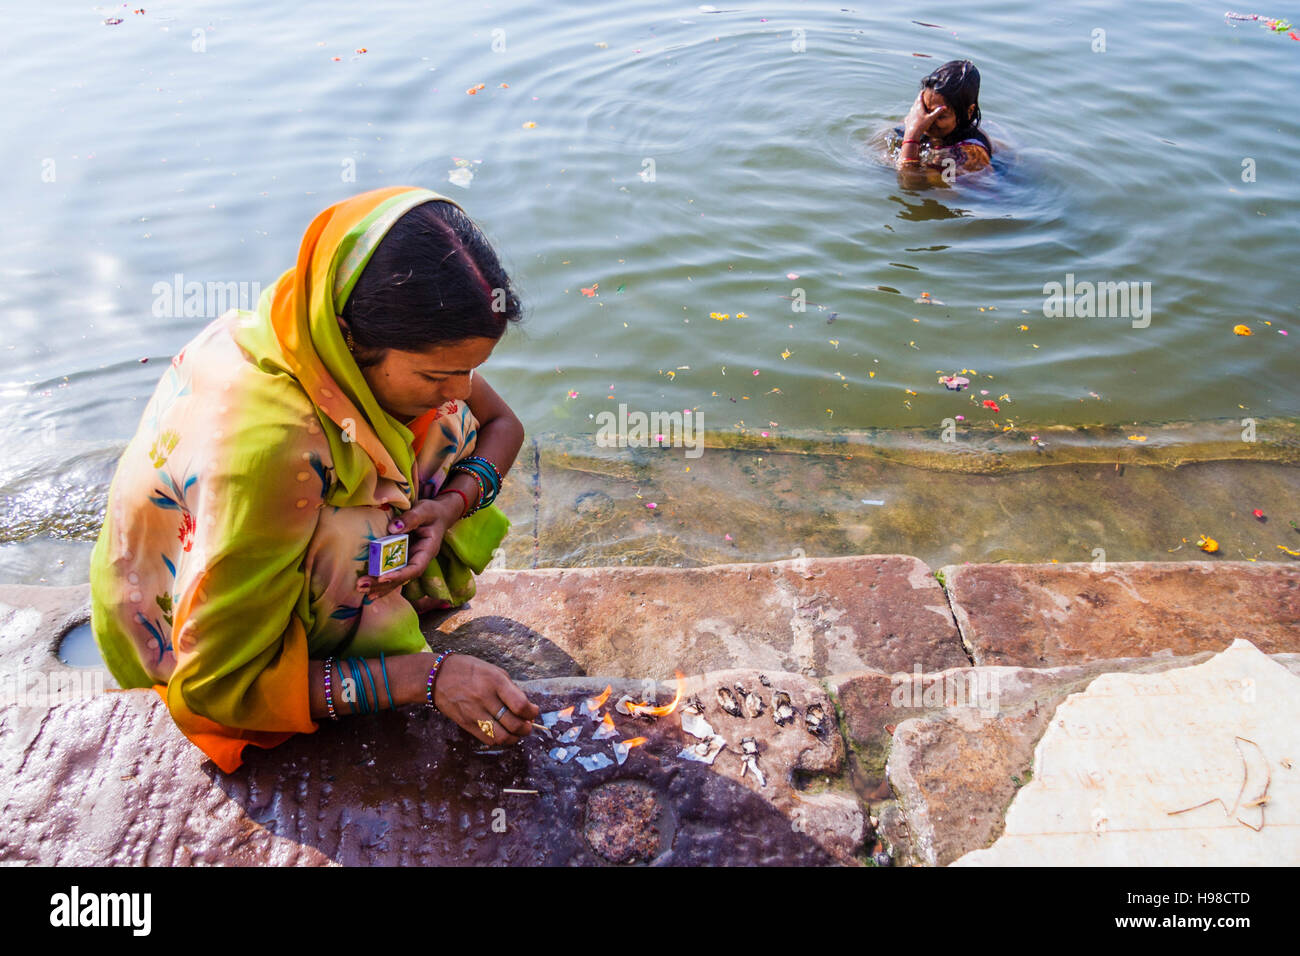 Women lighting candles for puja and bathing in Ganges river, Varanasi, India Stock Photo